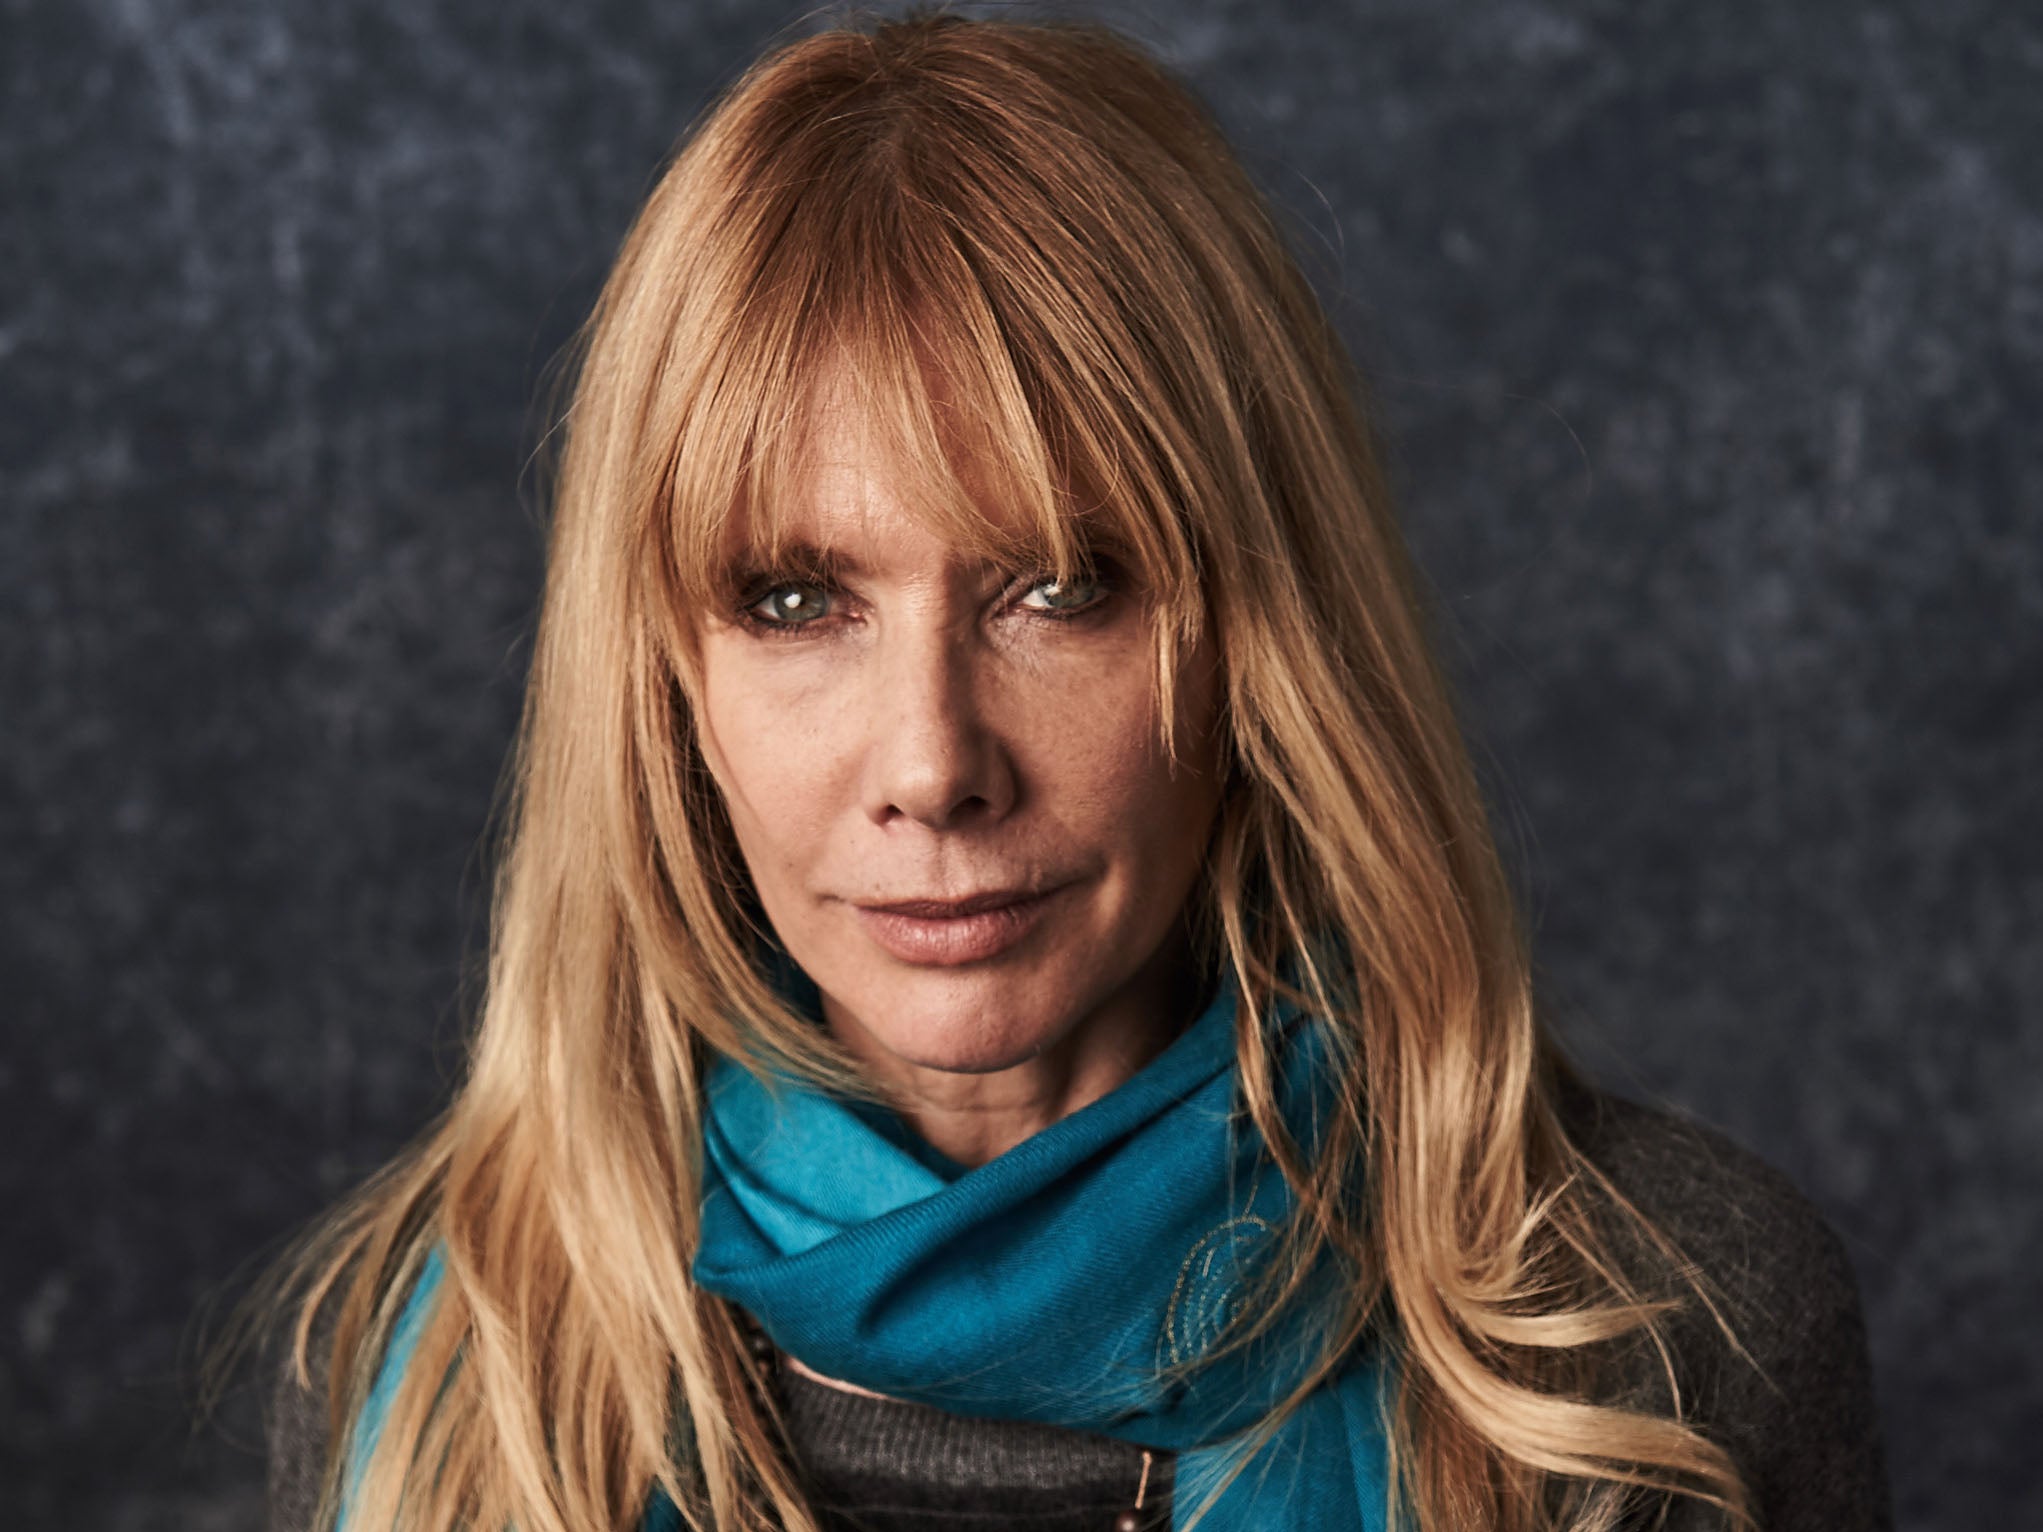 Oman Sxx Com - Rosanna Arquette says 'very powerful men in Hollywood continue to ...